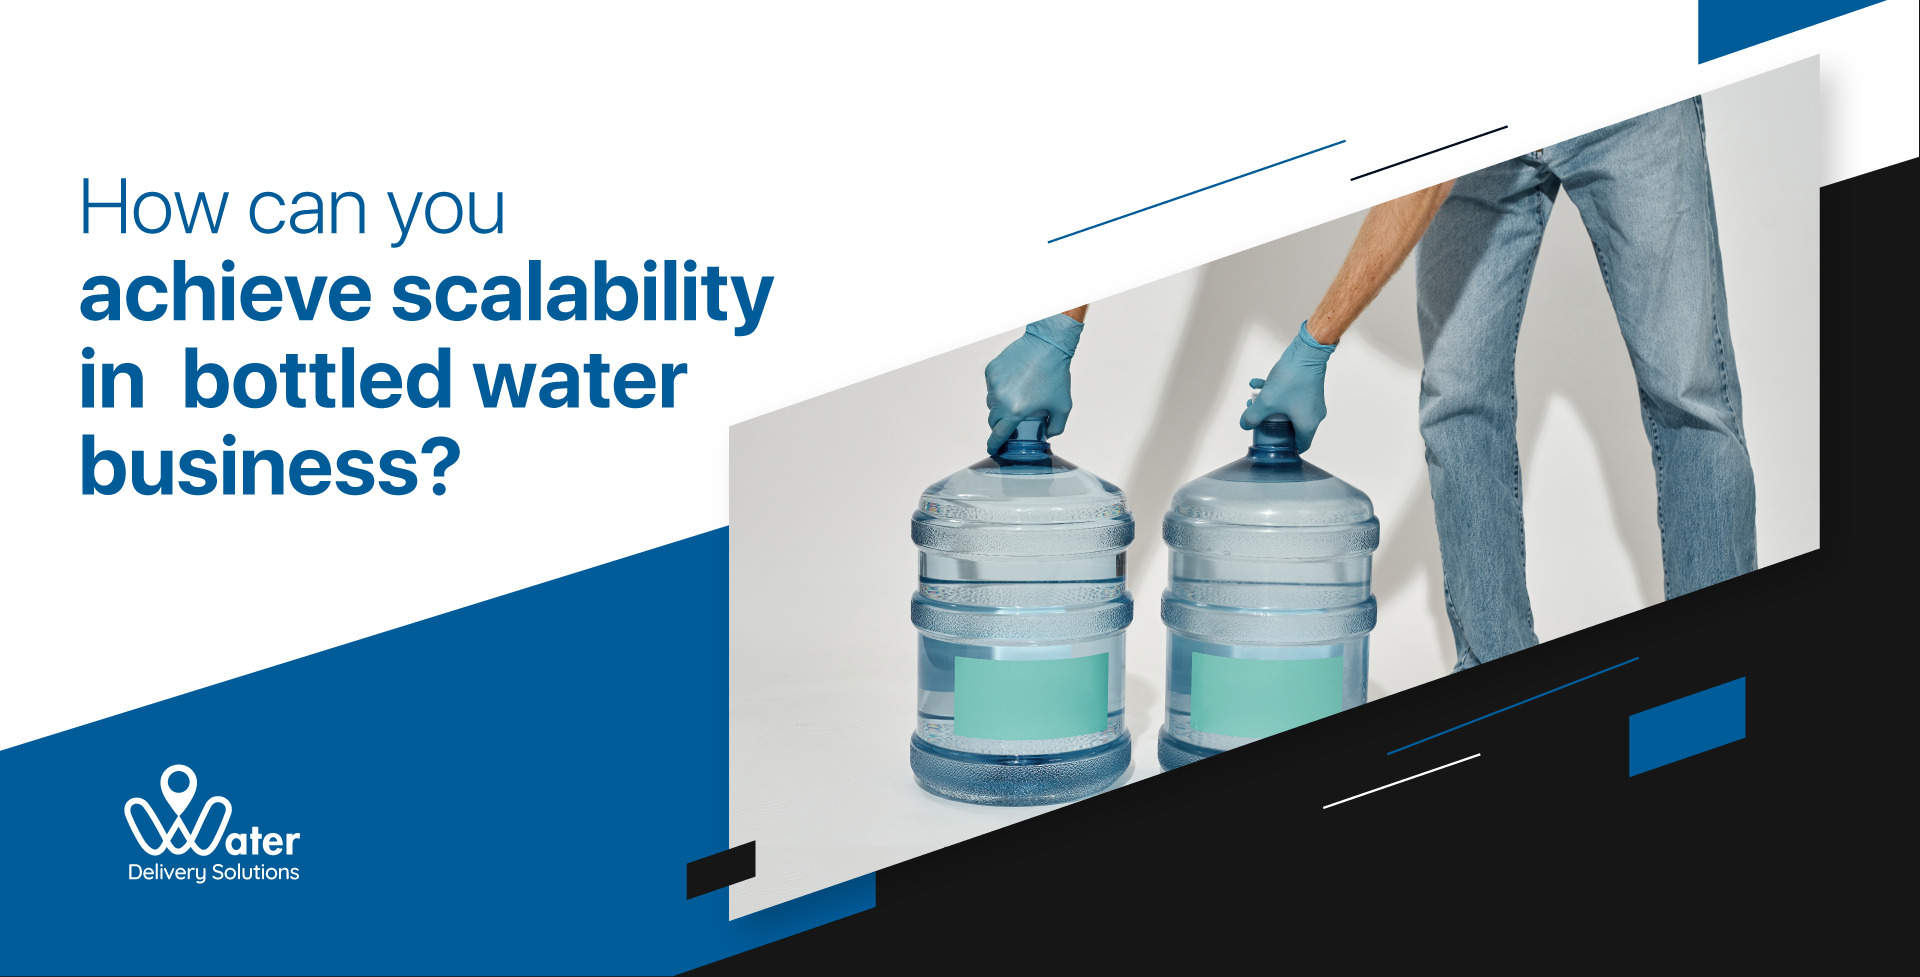 wds-founded-by-ravi-garg-website-insights-how-can-you-achieve-scalability-in-the-bottled-water-business-1